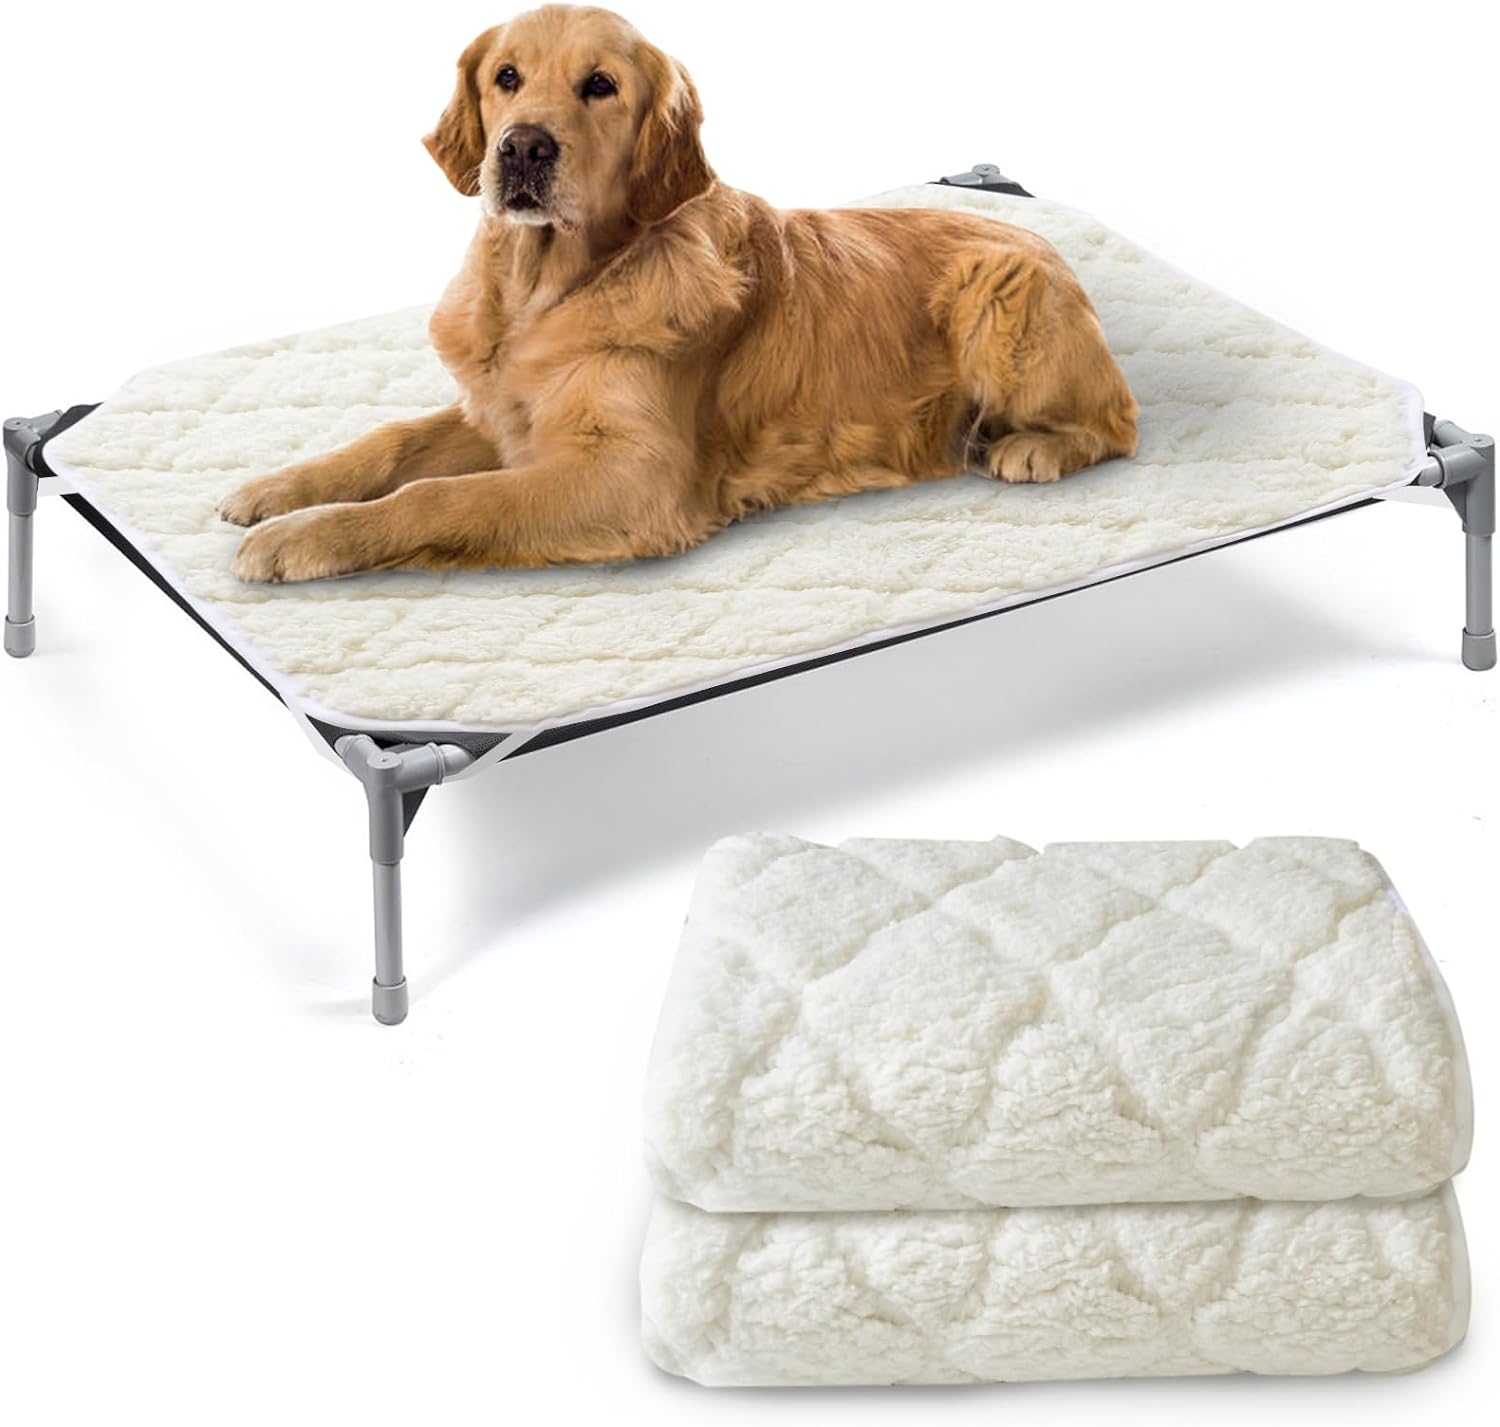 Elevated Dog Bed Pad Waterproof - 2 Pack, Soft Plush Dog Pet Pad for Dog Cot Bed, Machine Washable Dog/Cat Beds Pad with Corner Straps - Biloban Online Store